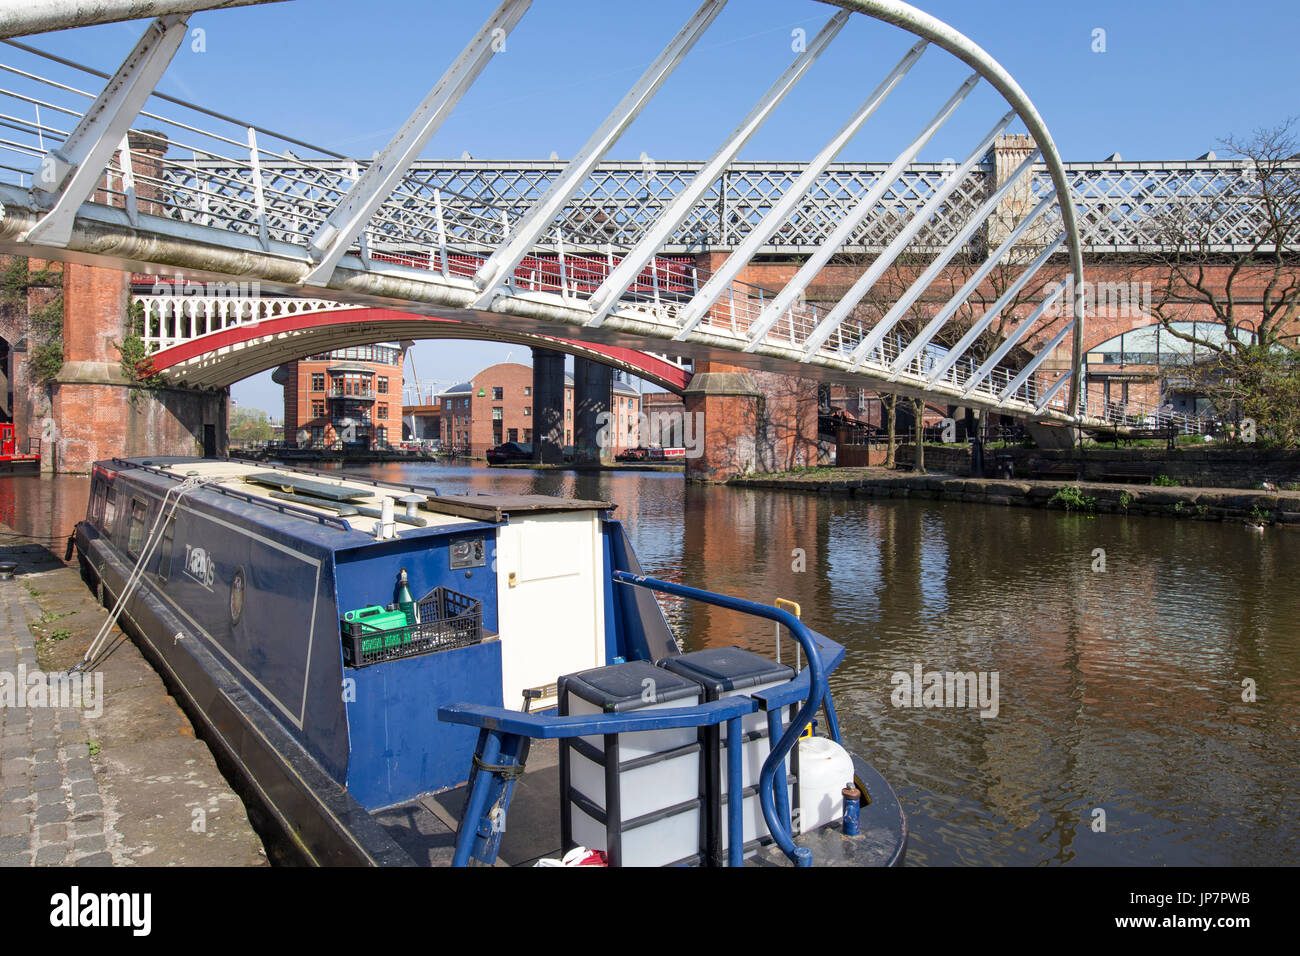 View of Castlefield Basin & the Merchant’s Bridge, with the historical rail bridge and Potato Wharf in the background Stock Photo